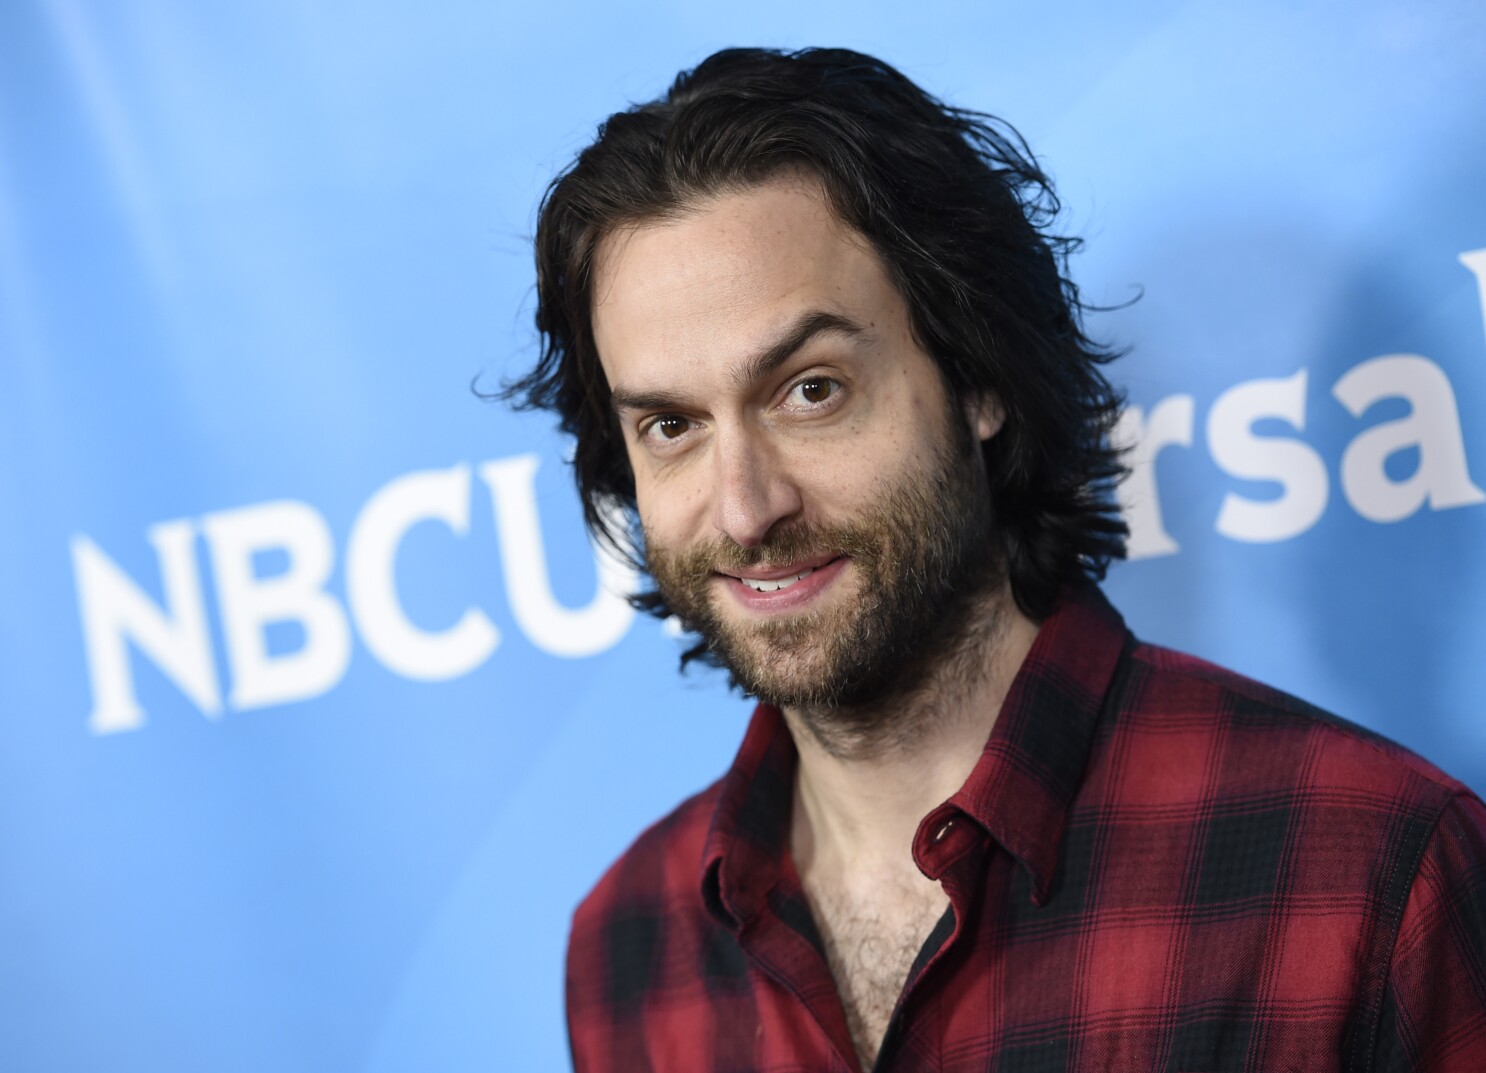 Chris D Elia Dropped By Reps At Caa Wme 3 Arts Entertainment Los Angeles Times